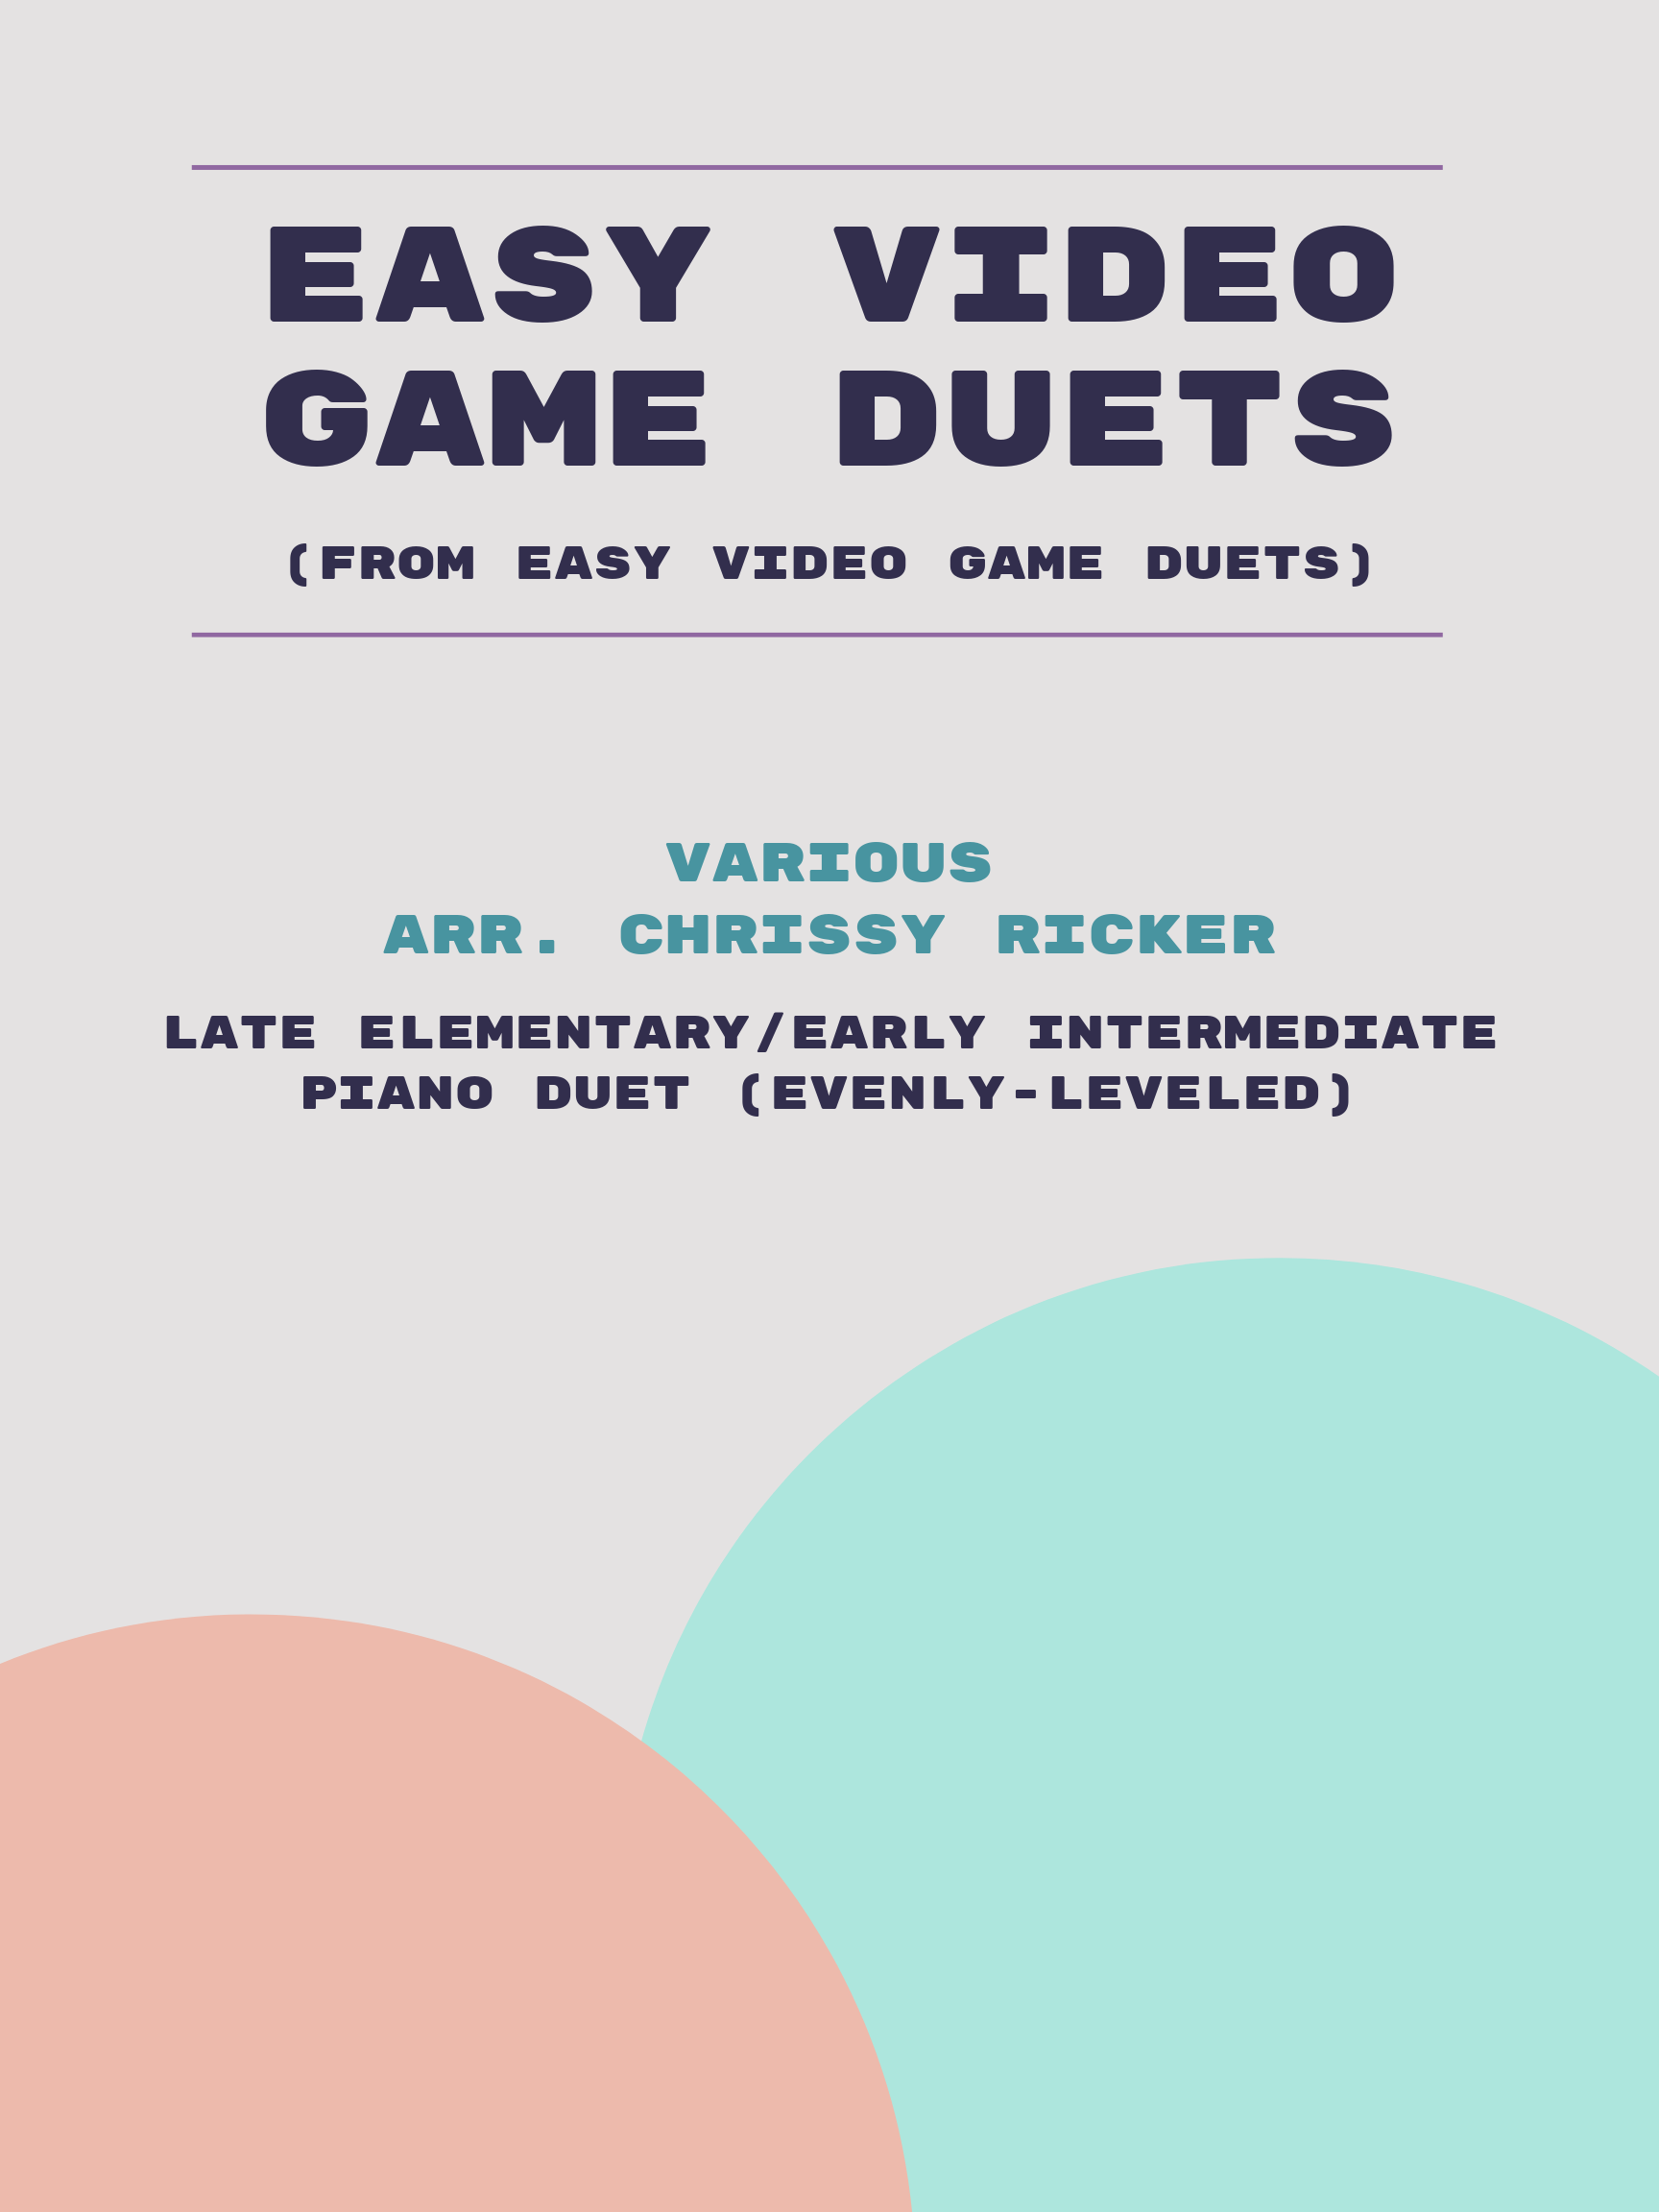 Easy Video Game Duets by Various